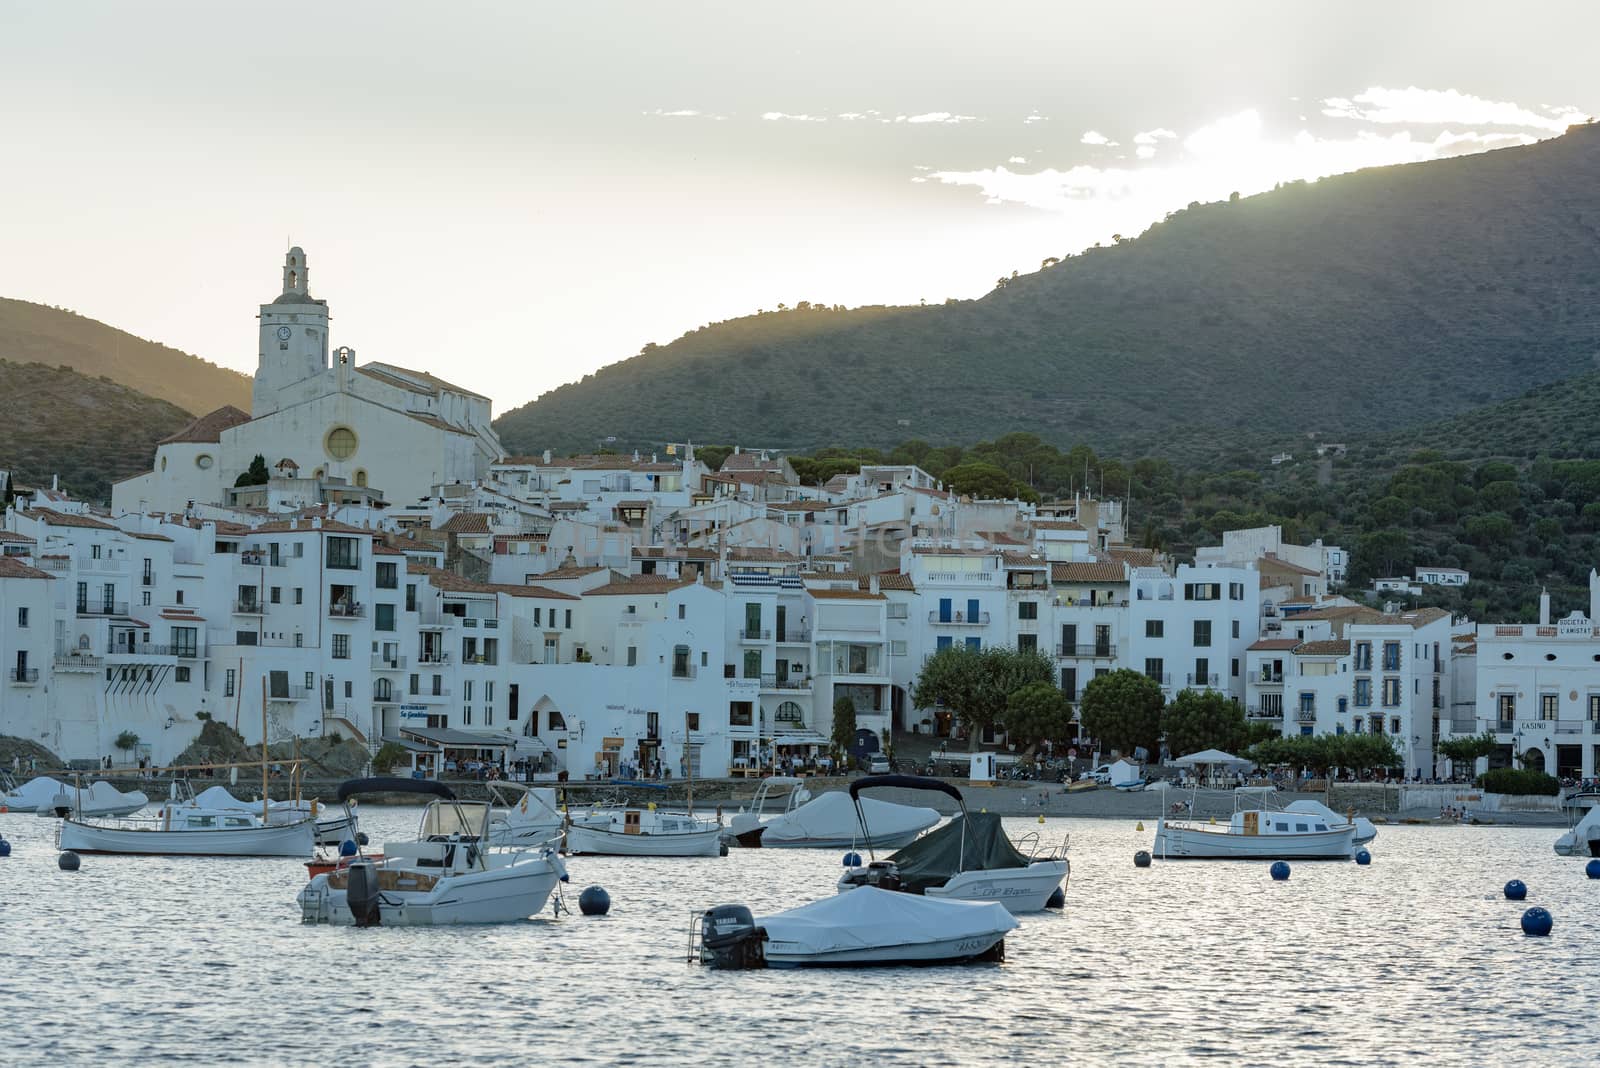 Boats in the beach and houses of the village of Cadaques, Spain  by martinscphoto